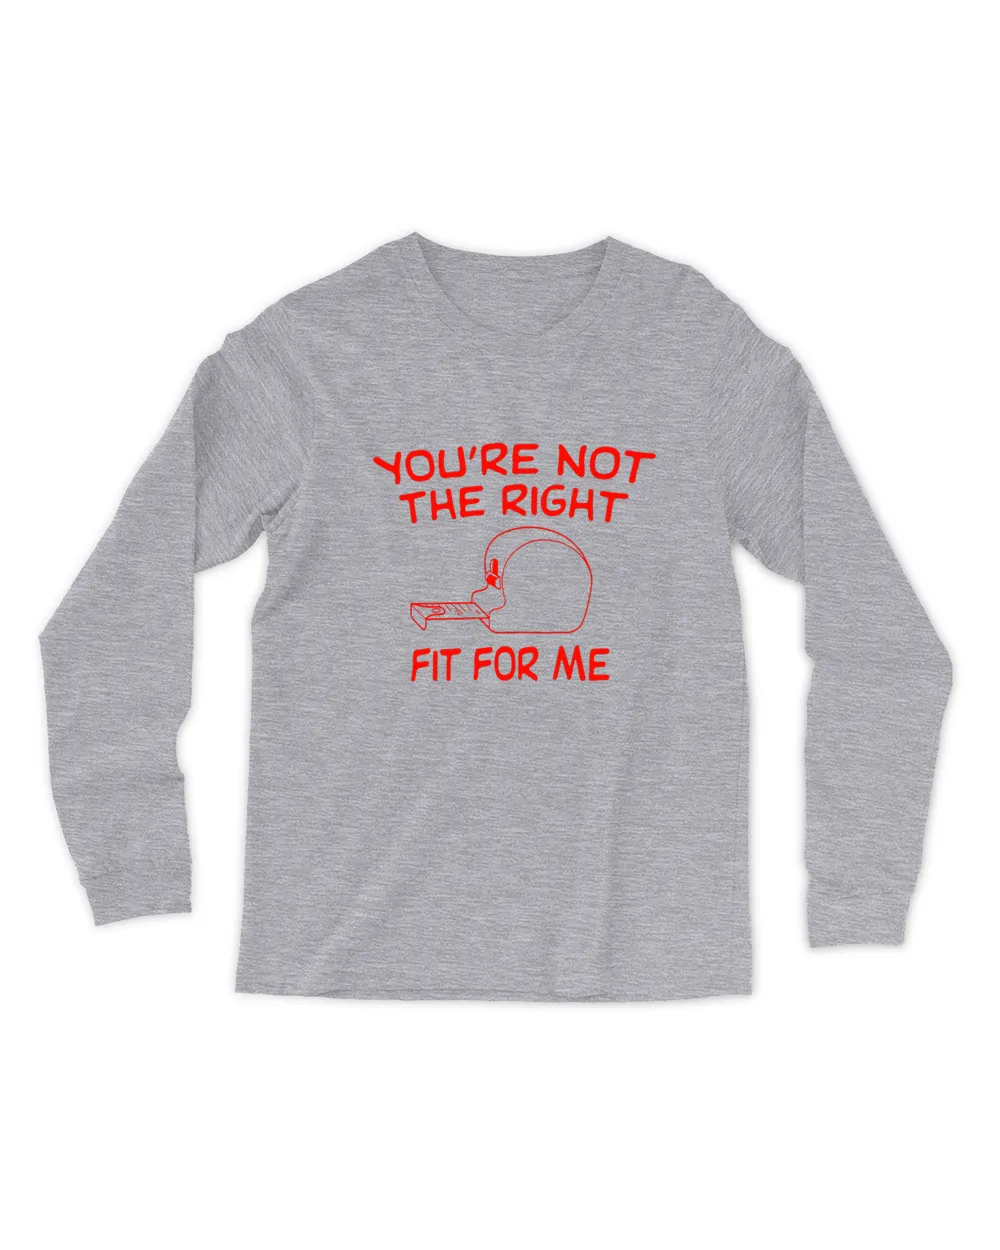 You're Not The Right Fit For Me Tee Shirt Men's Long Sleeved T-Shirt sport-grey 